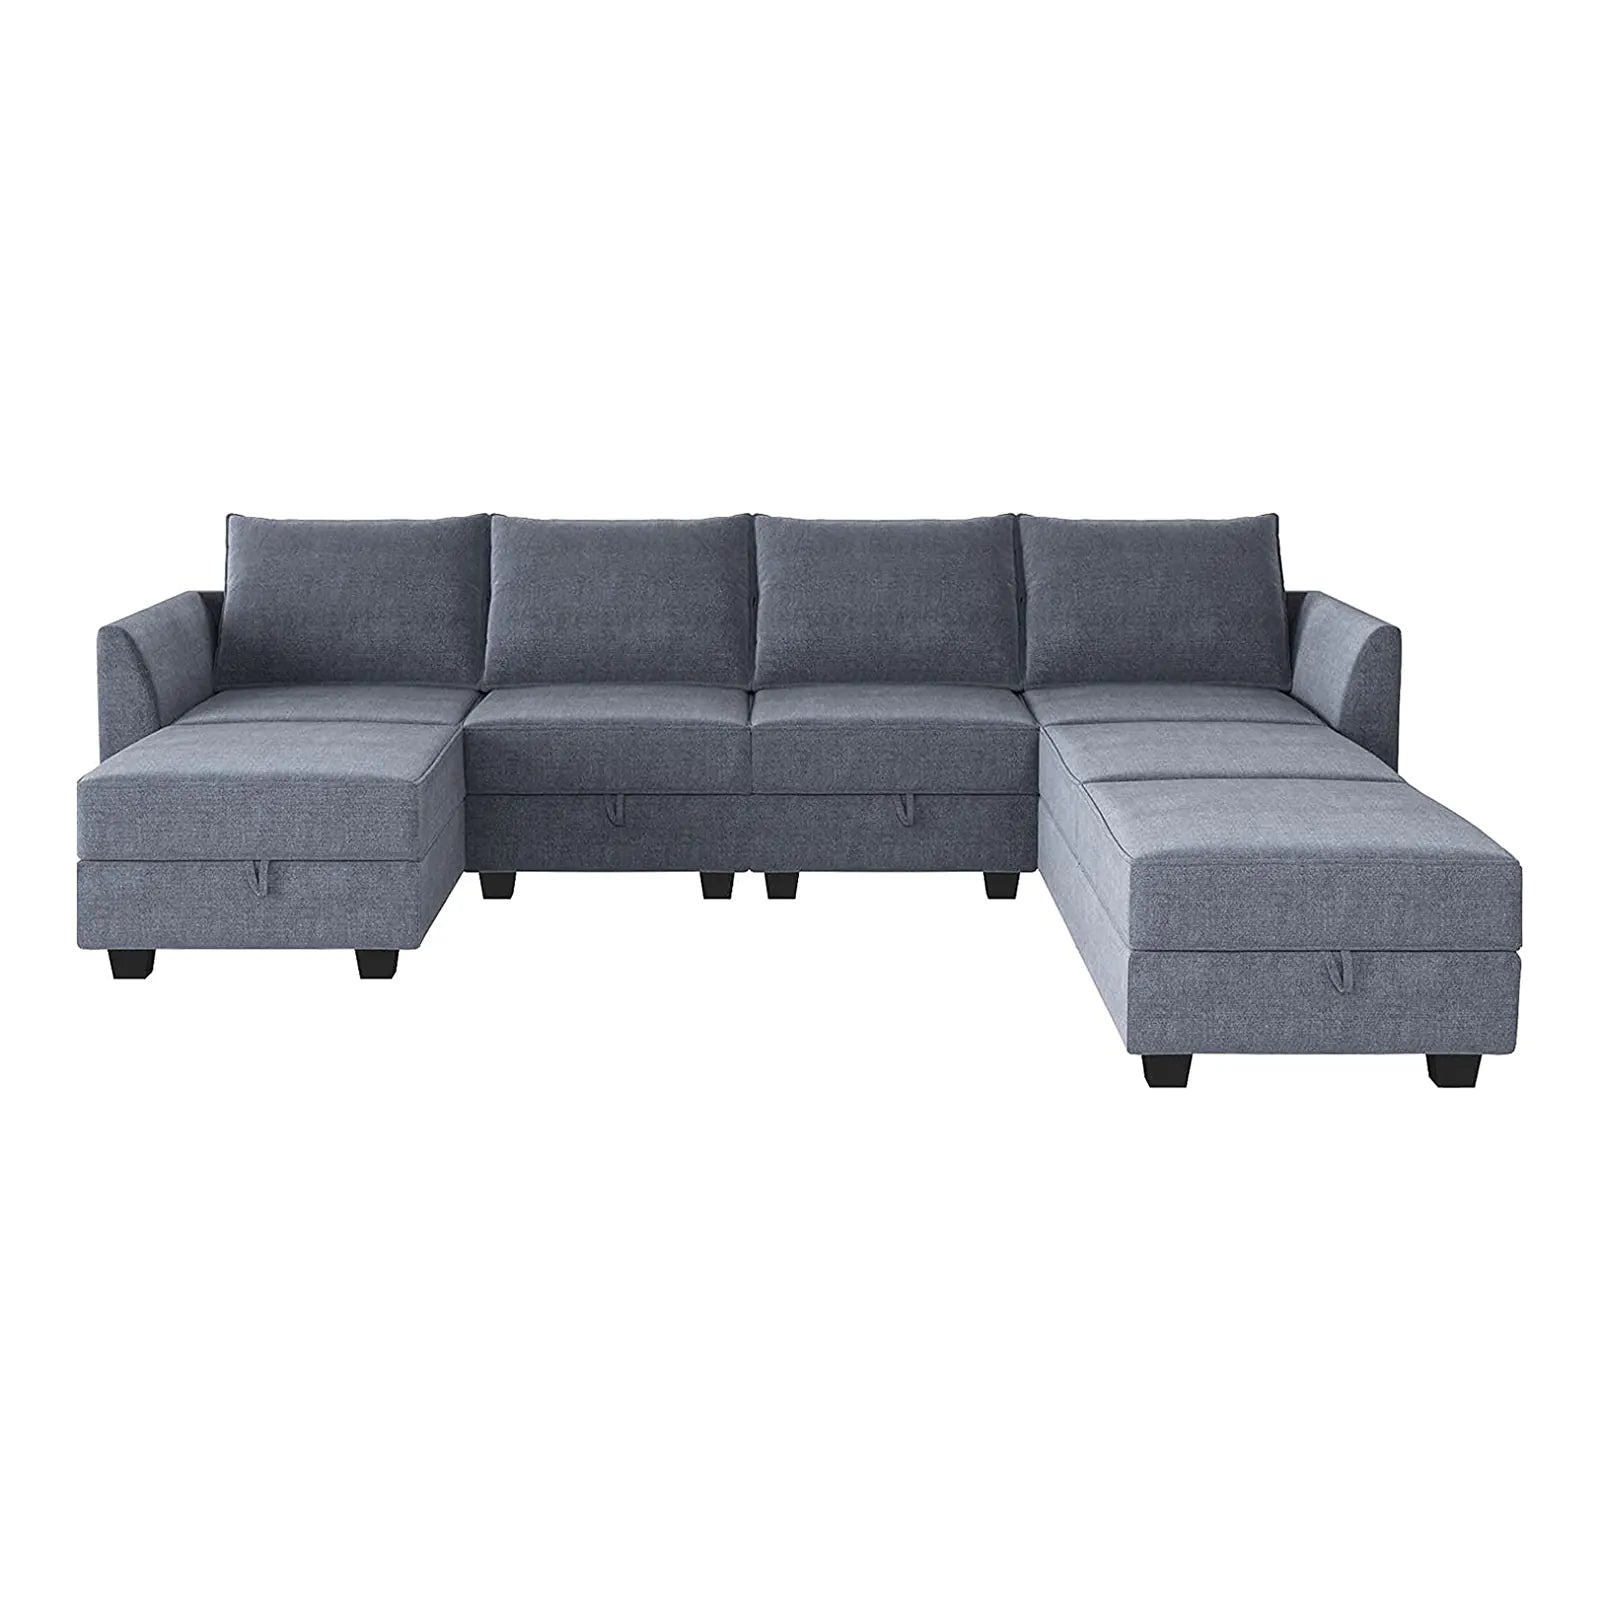 Convertible and Modular Sectional Sofa Reversible Chaise with Ottomans